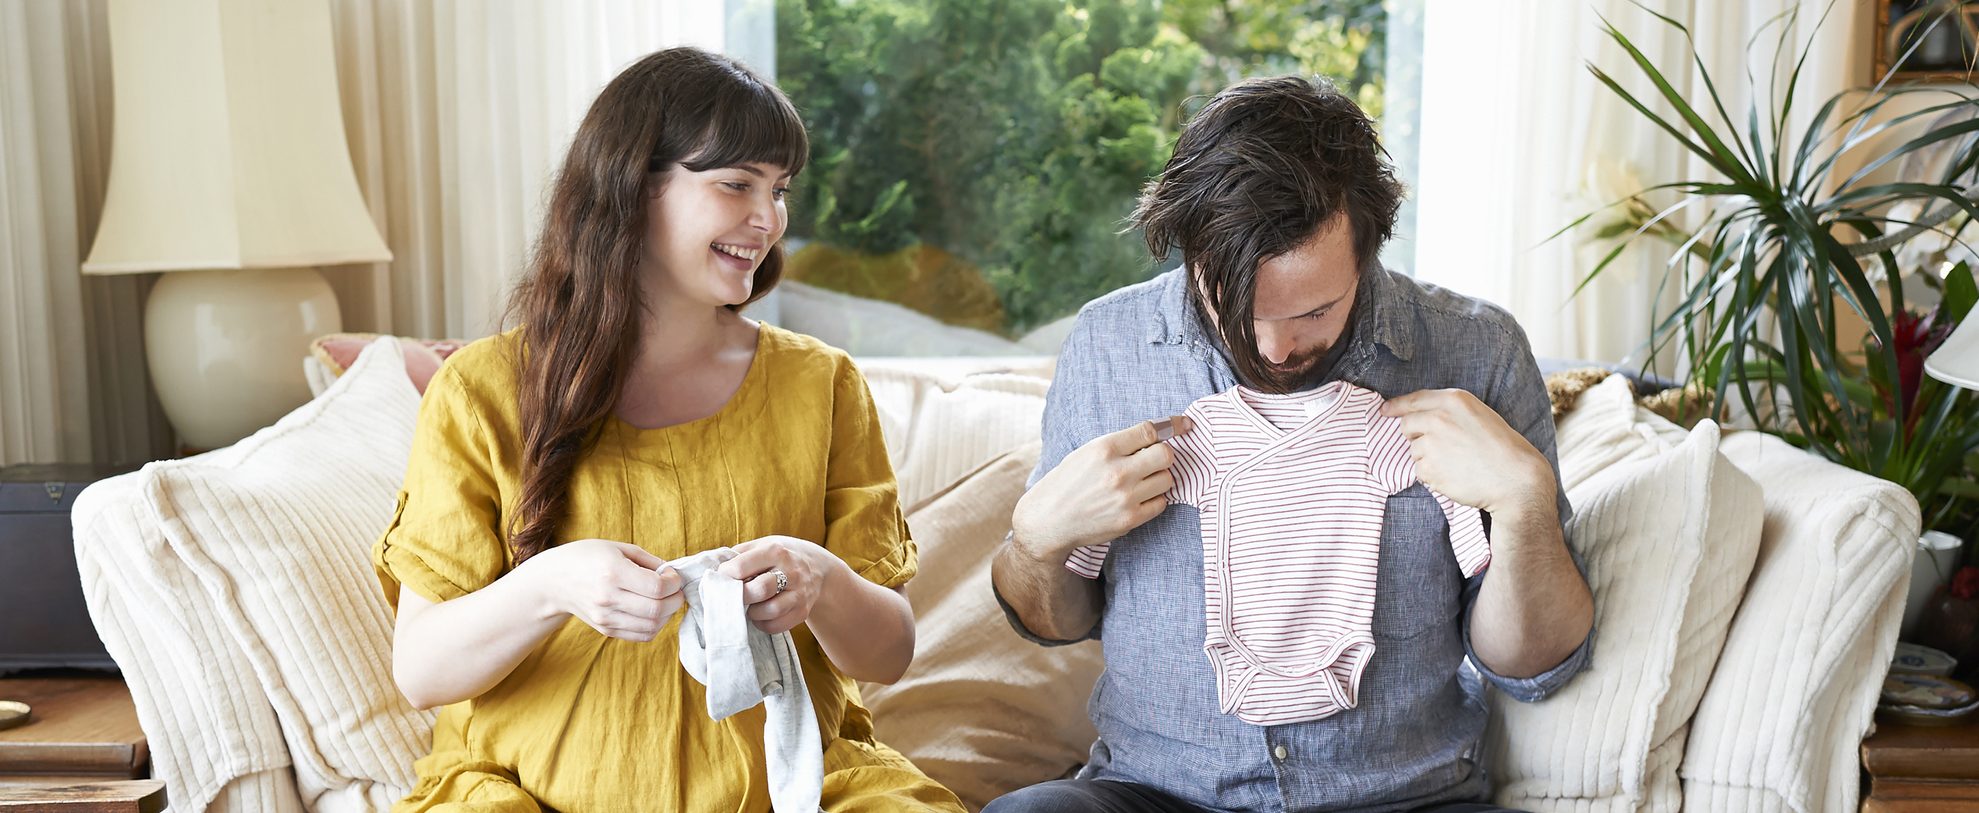 A man and a woman sit on a couch together, each holding some baby clothes. The man holds up a onesie to his chest.